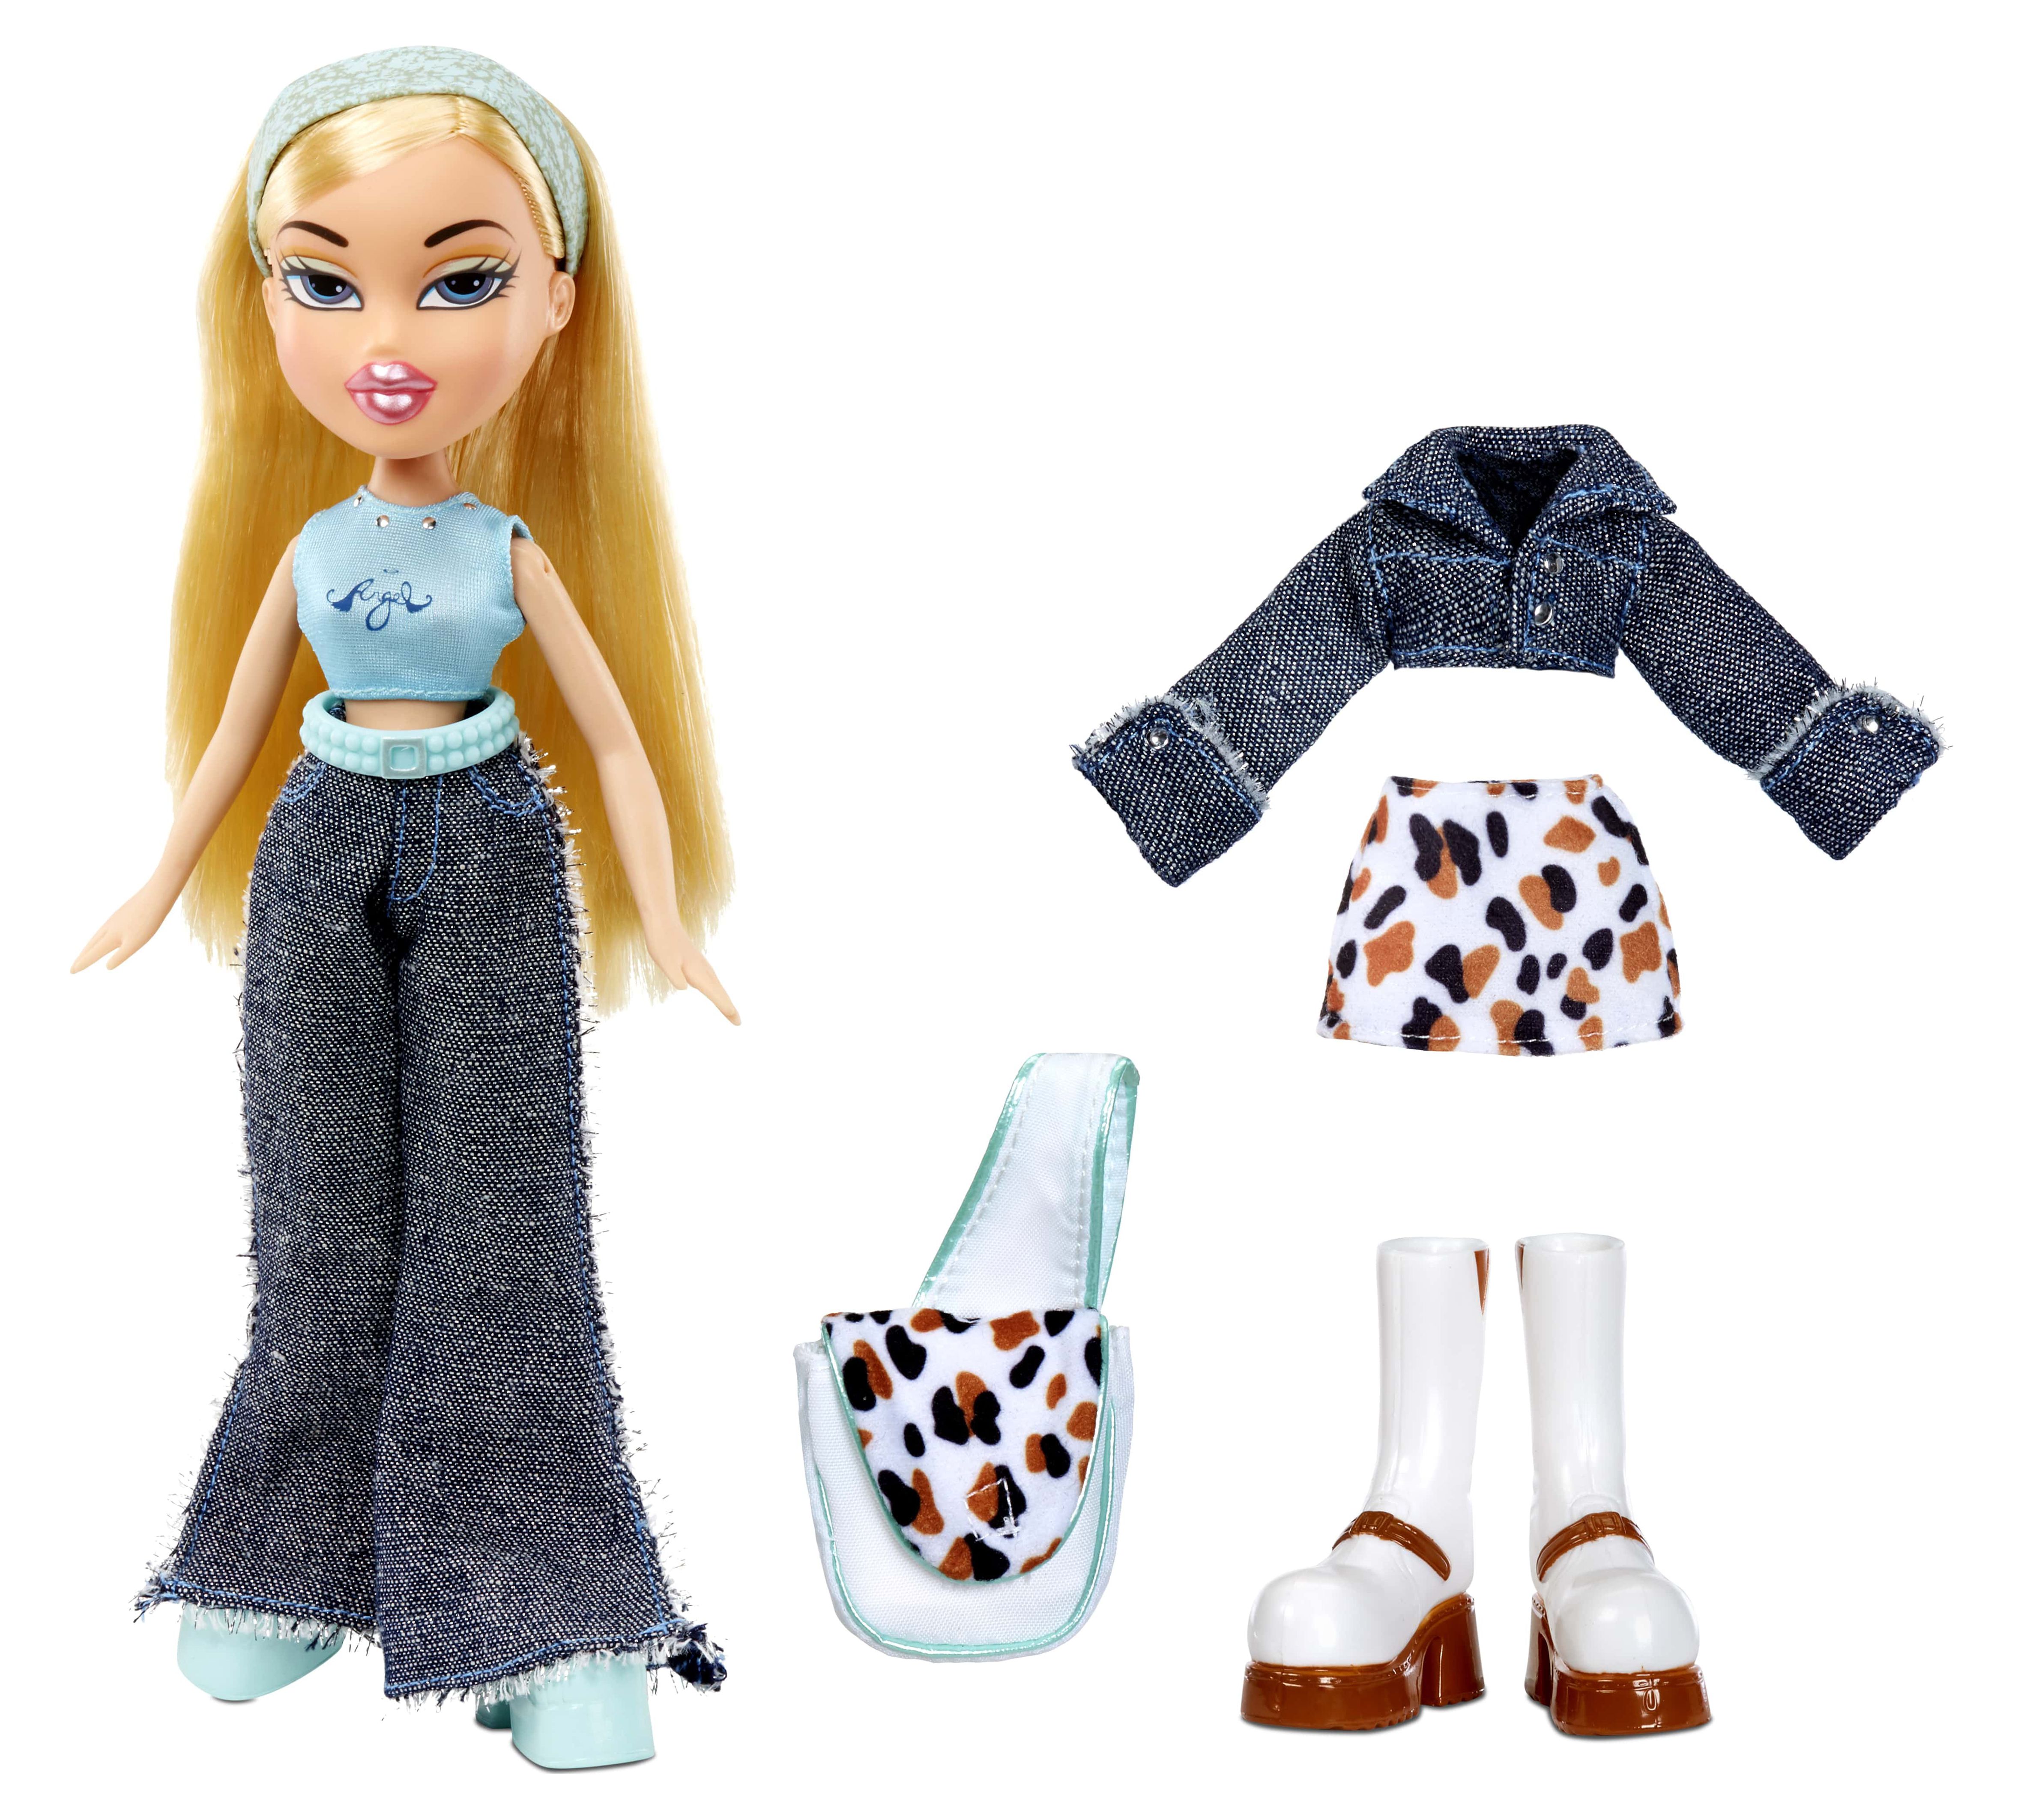 Bratz 20 Yearz Special Edition Original Fashion Doll Cloe, Great Gift for Children Ages 6, 7, 8+ - image 3 of 8